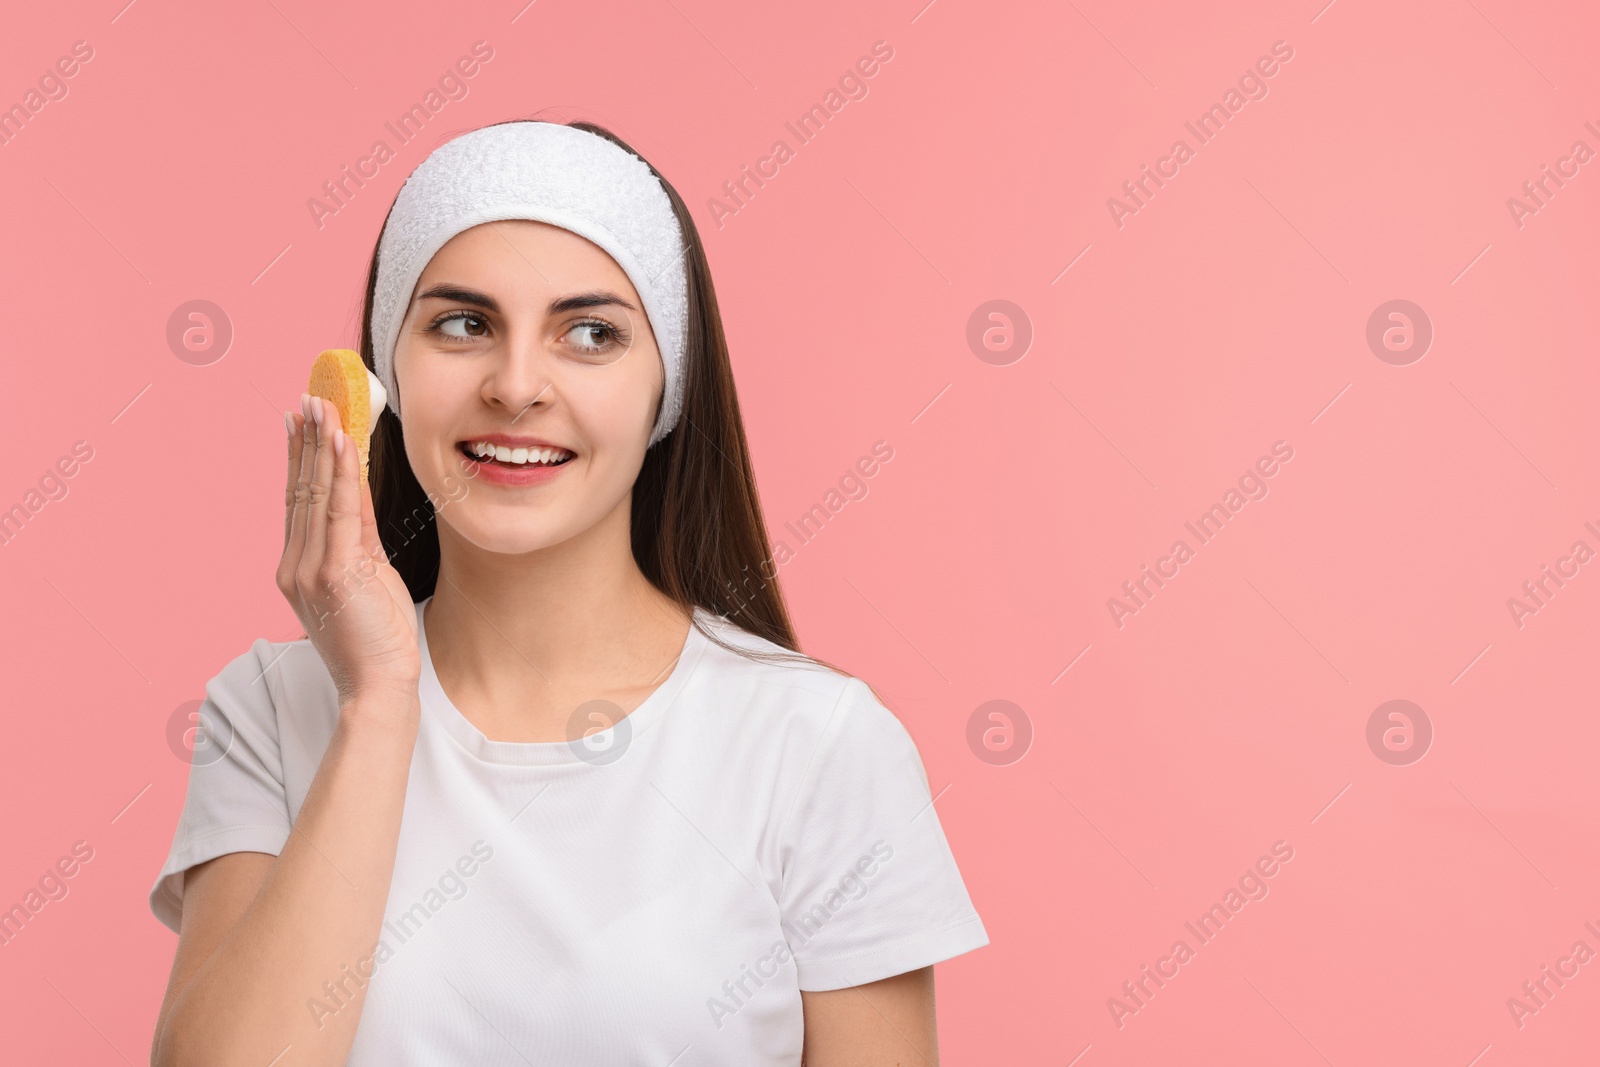 Photo of Young woman with headband washing her face using sponge on pink background, space for text